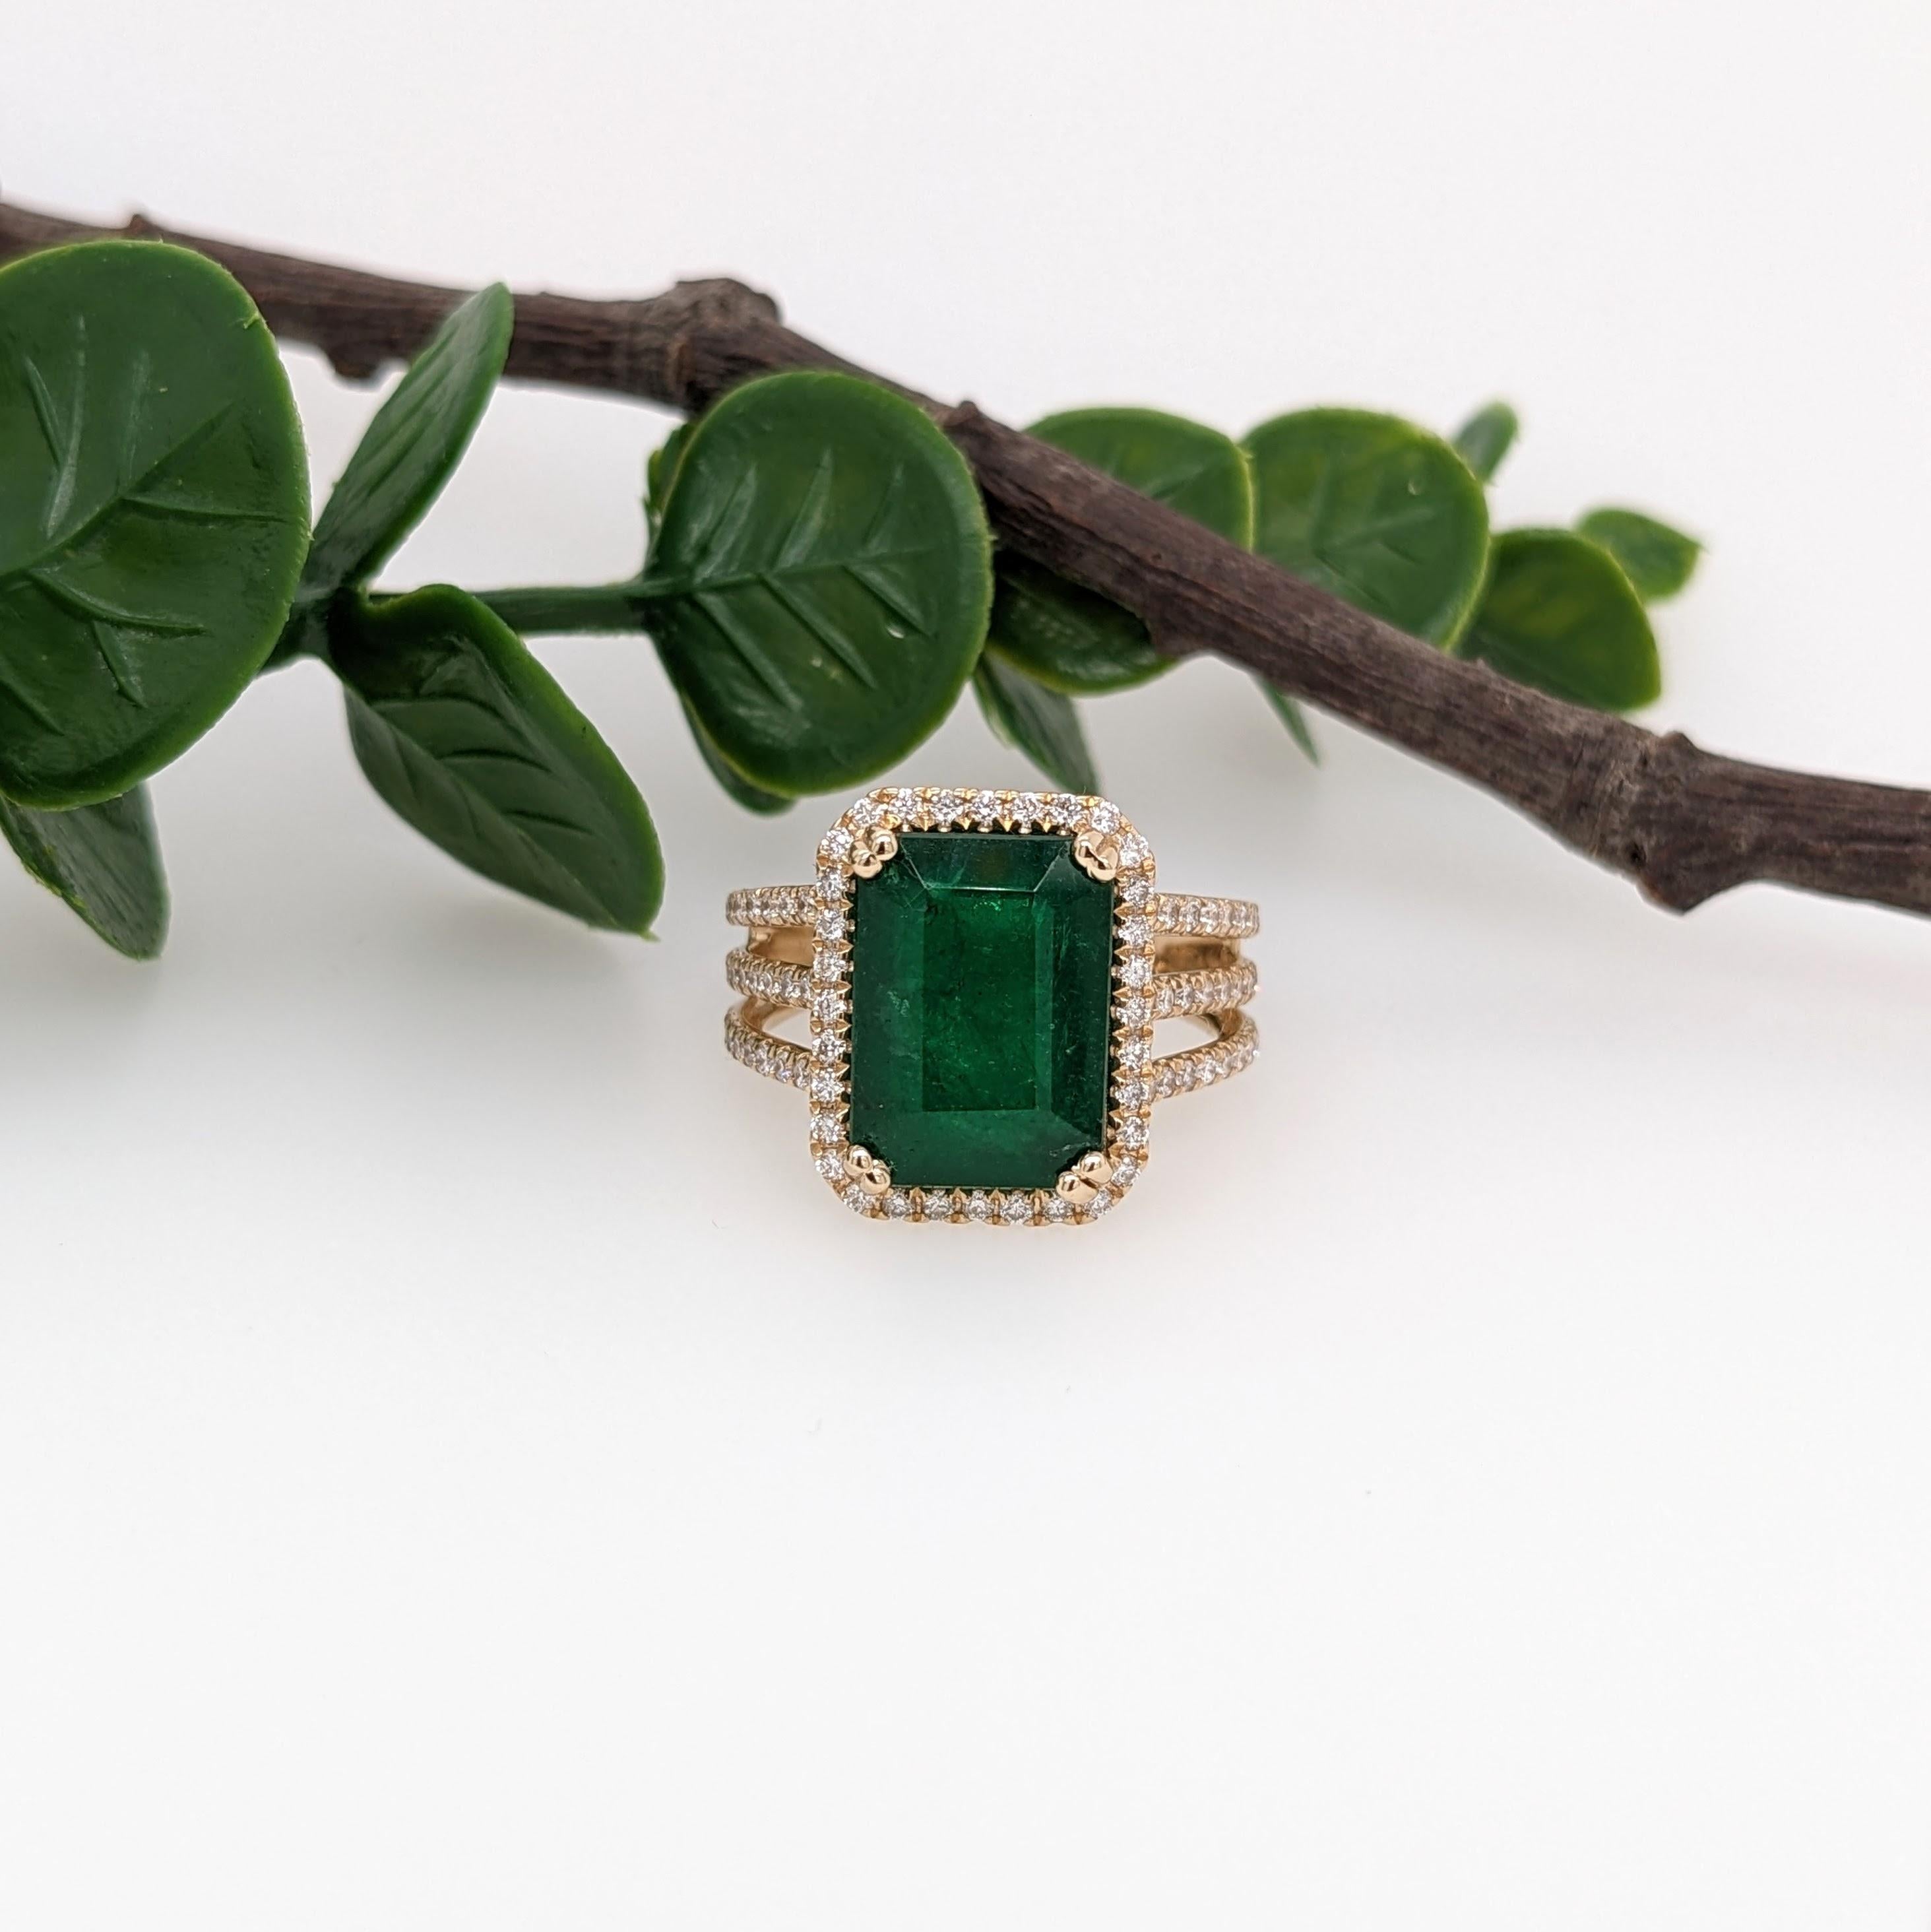 A gorgeous ring featuring a beautiful deep green emerald set in solid 14k yellow gold with all natural diamond accents. Enjoy a little extra sparkle with the diamond studded layered split shank! A gorgeous modern look for an elegant addition to any